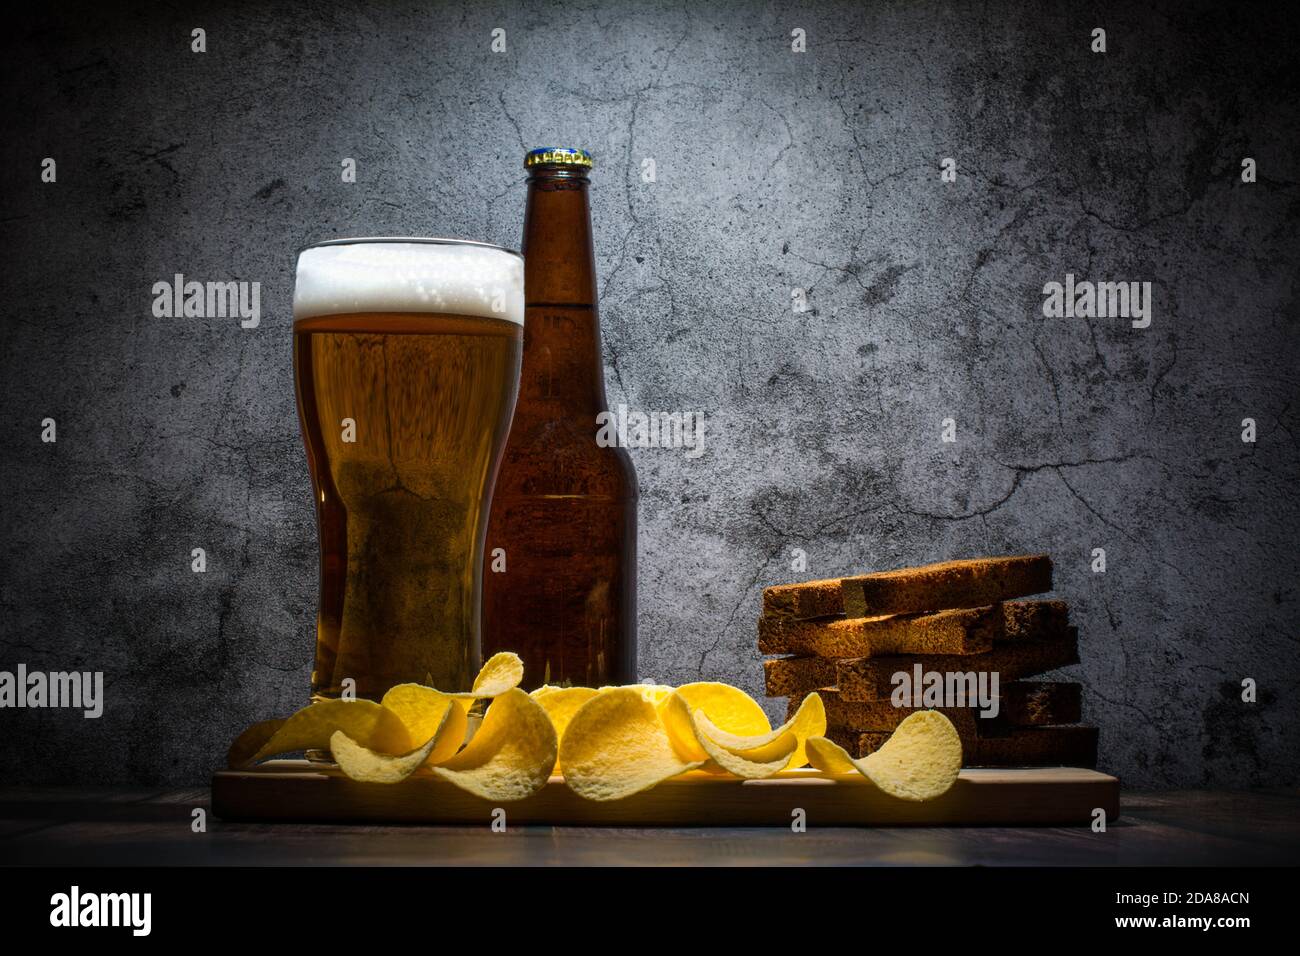 Lager beer and snacks on stone table. Nachos, chips side view Stock Photo